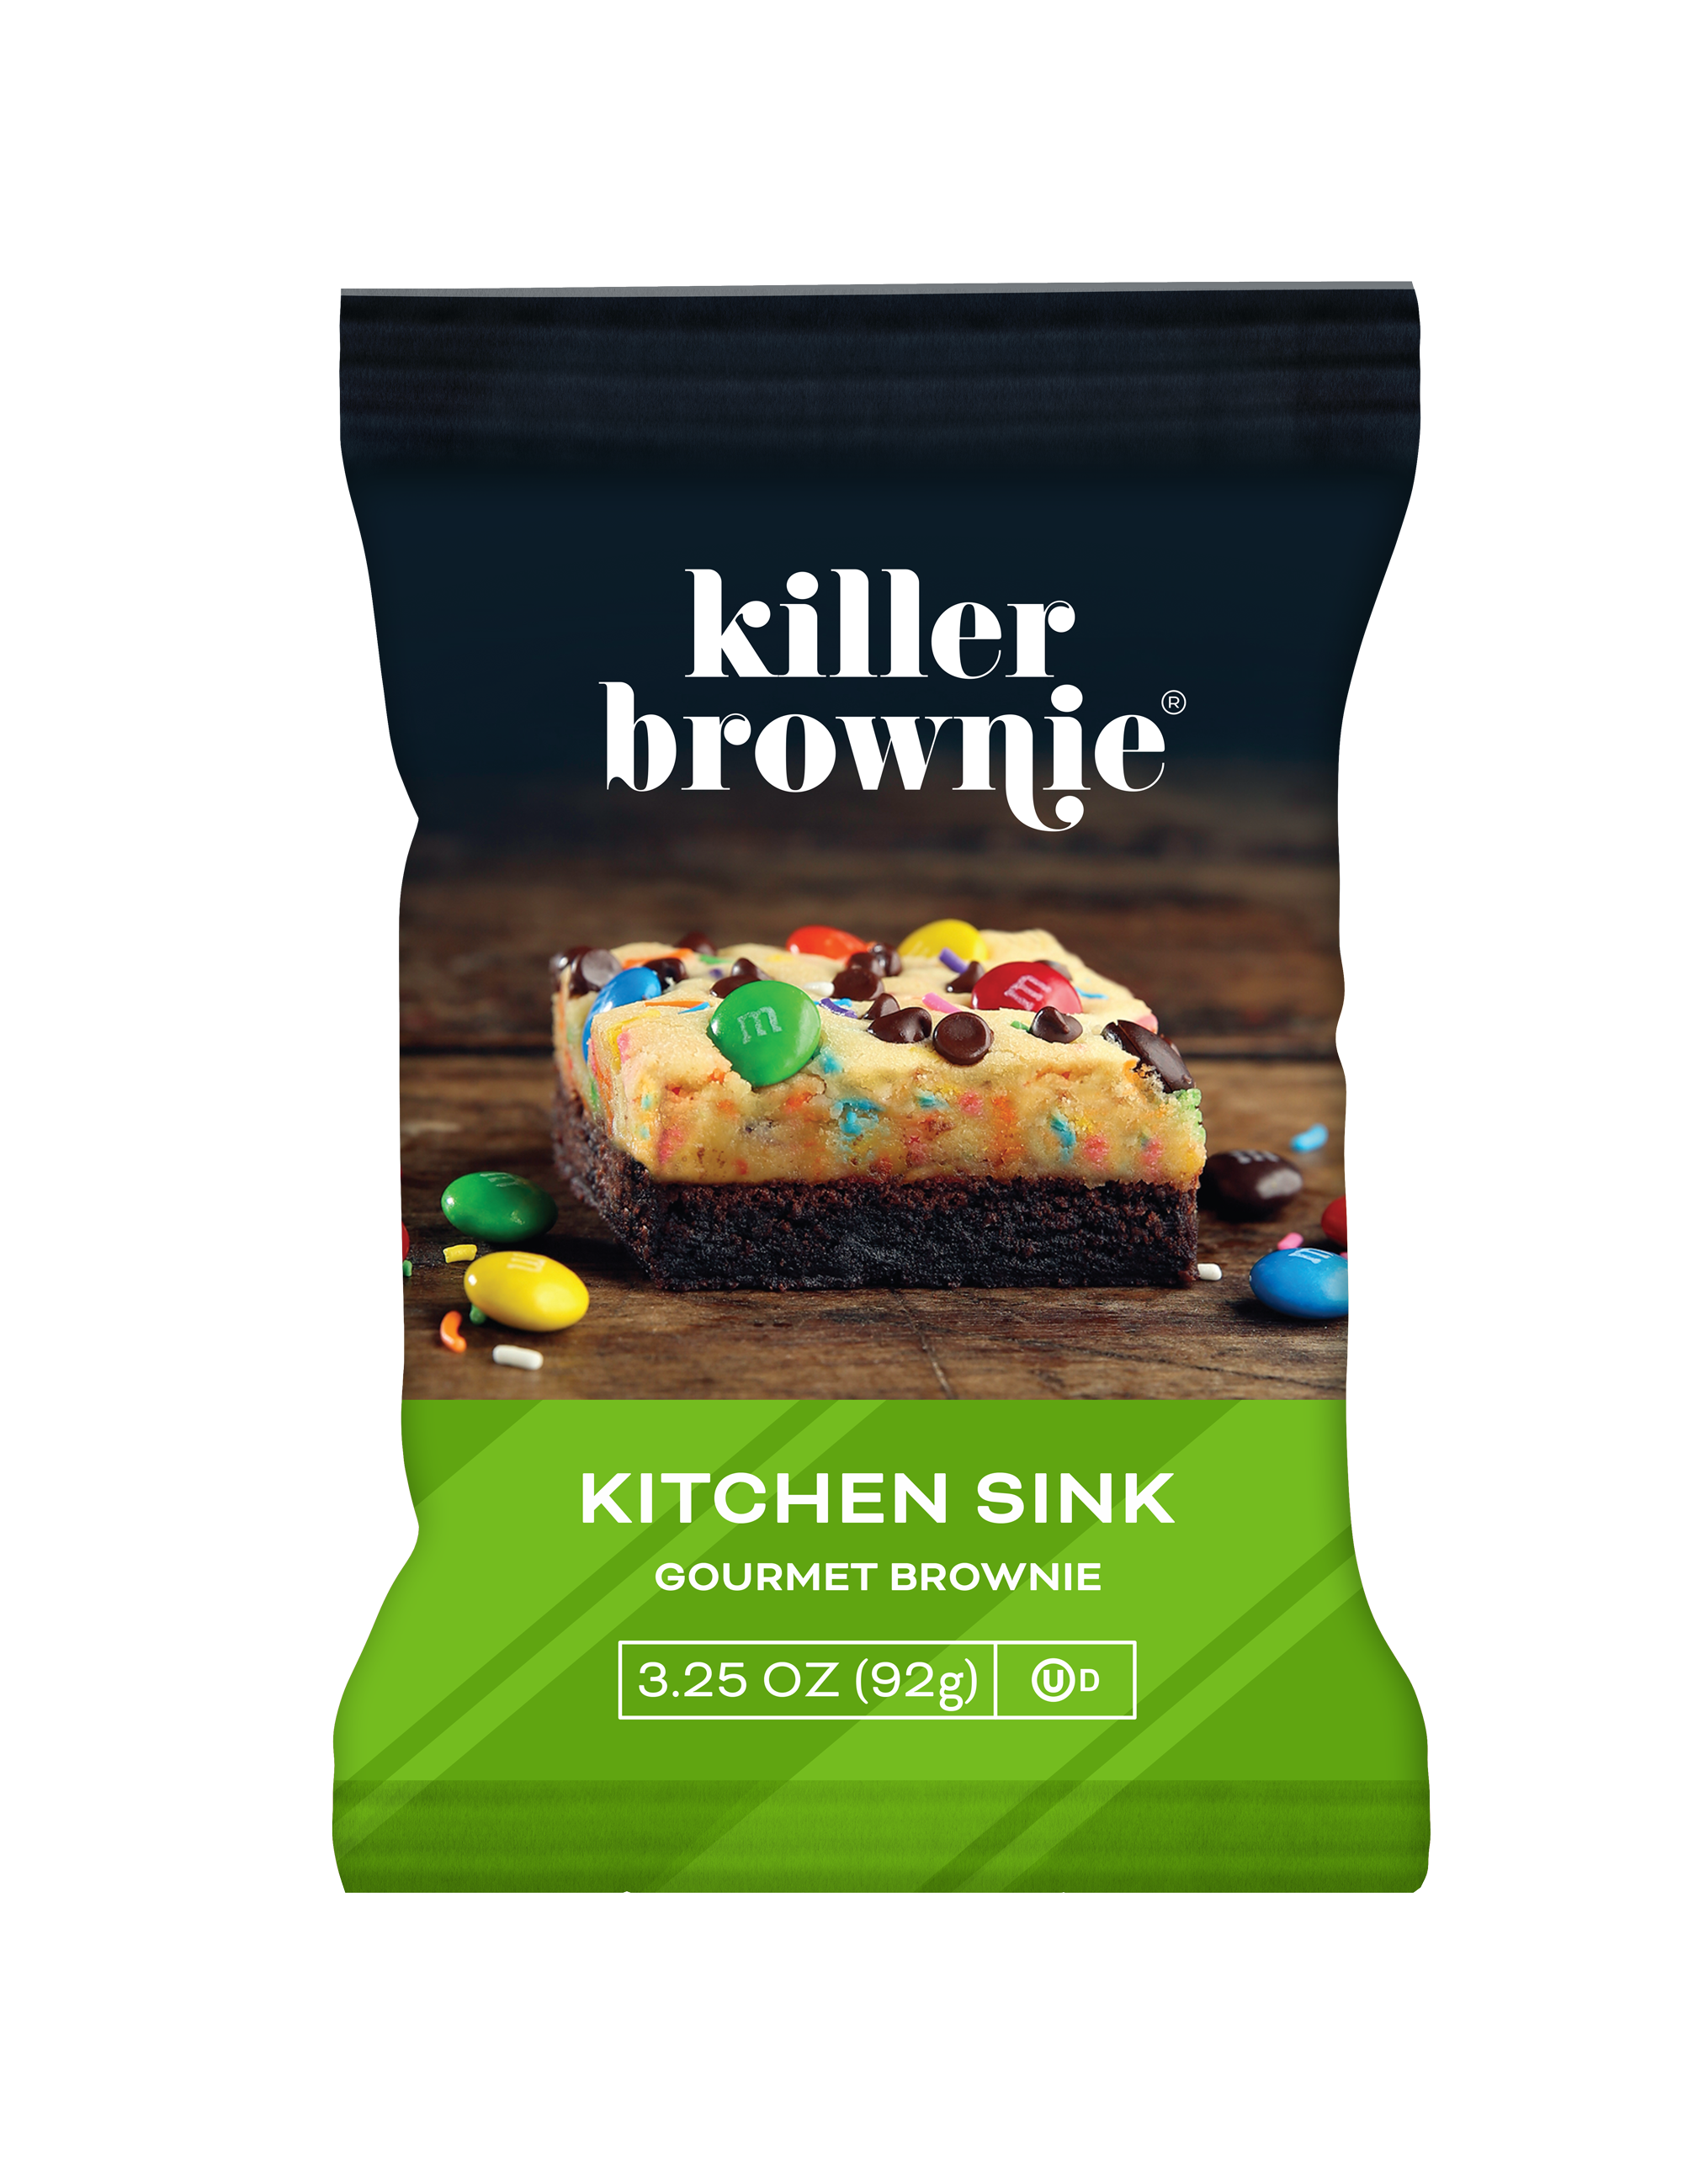 Killer Brownie Co. announces that its Kitchen Sink brownies are now available with individual packaging for distribution to grocery, c-stores, restaurants and more